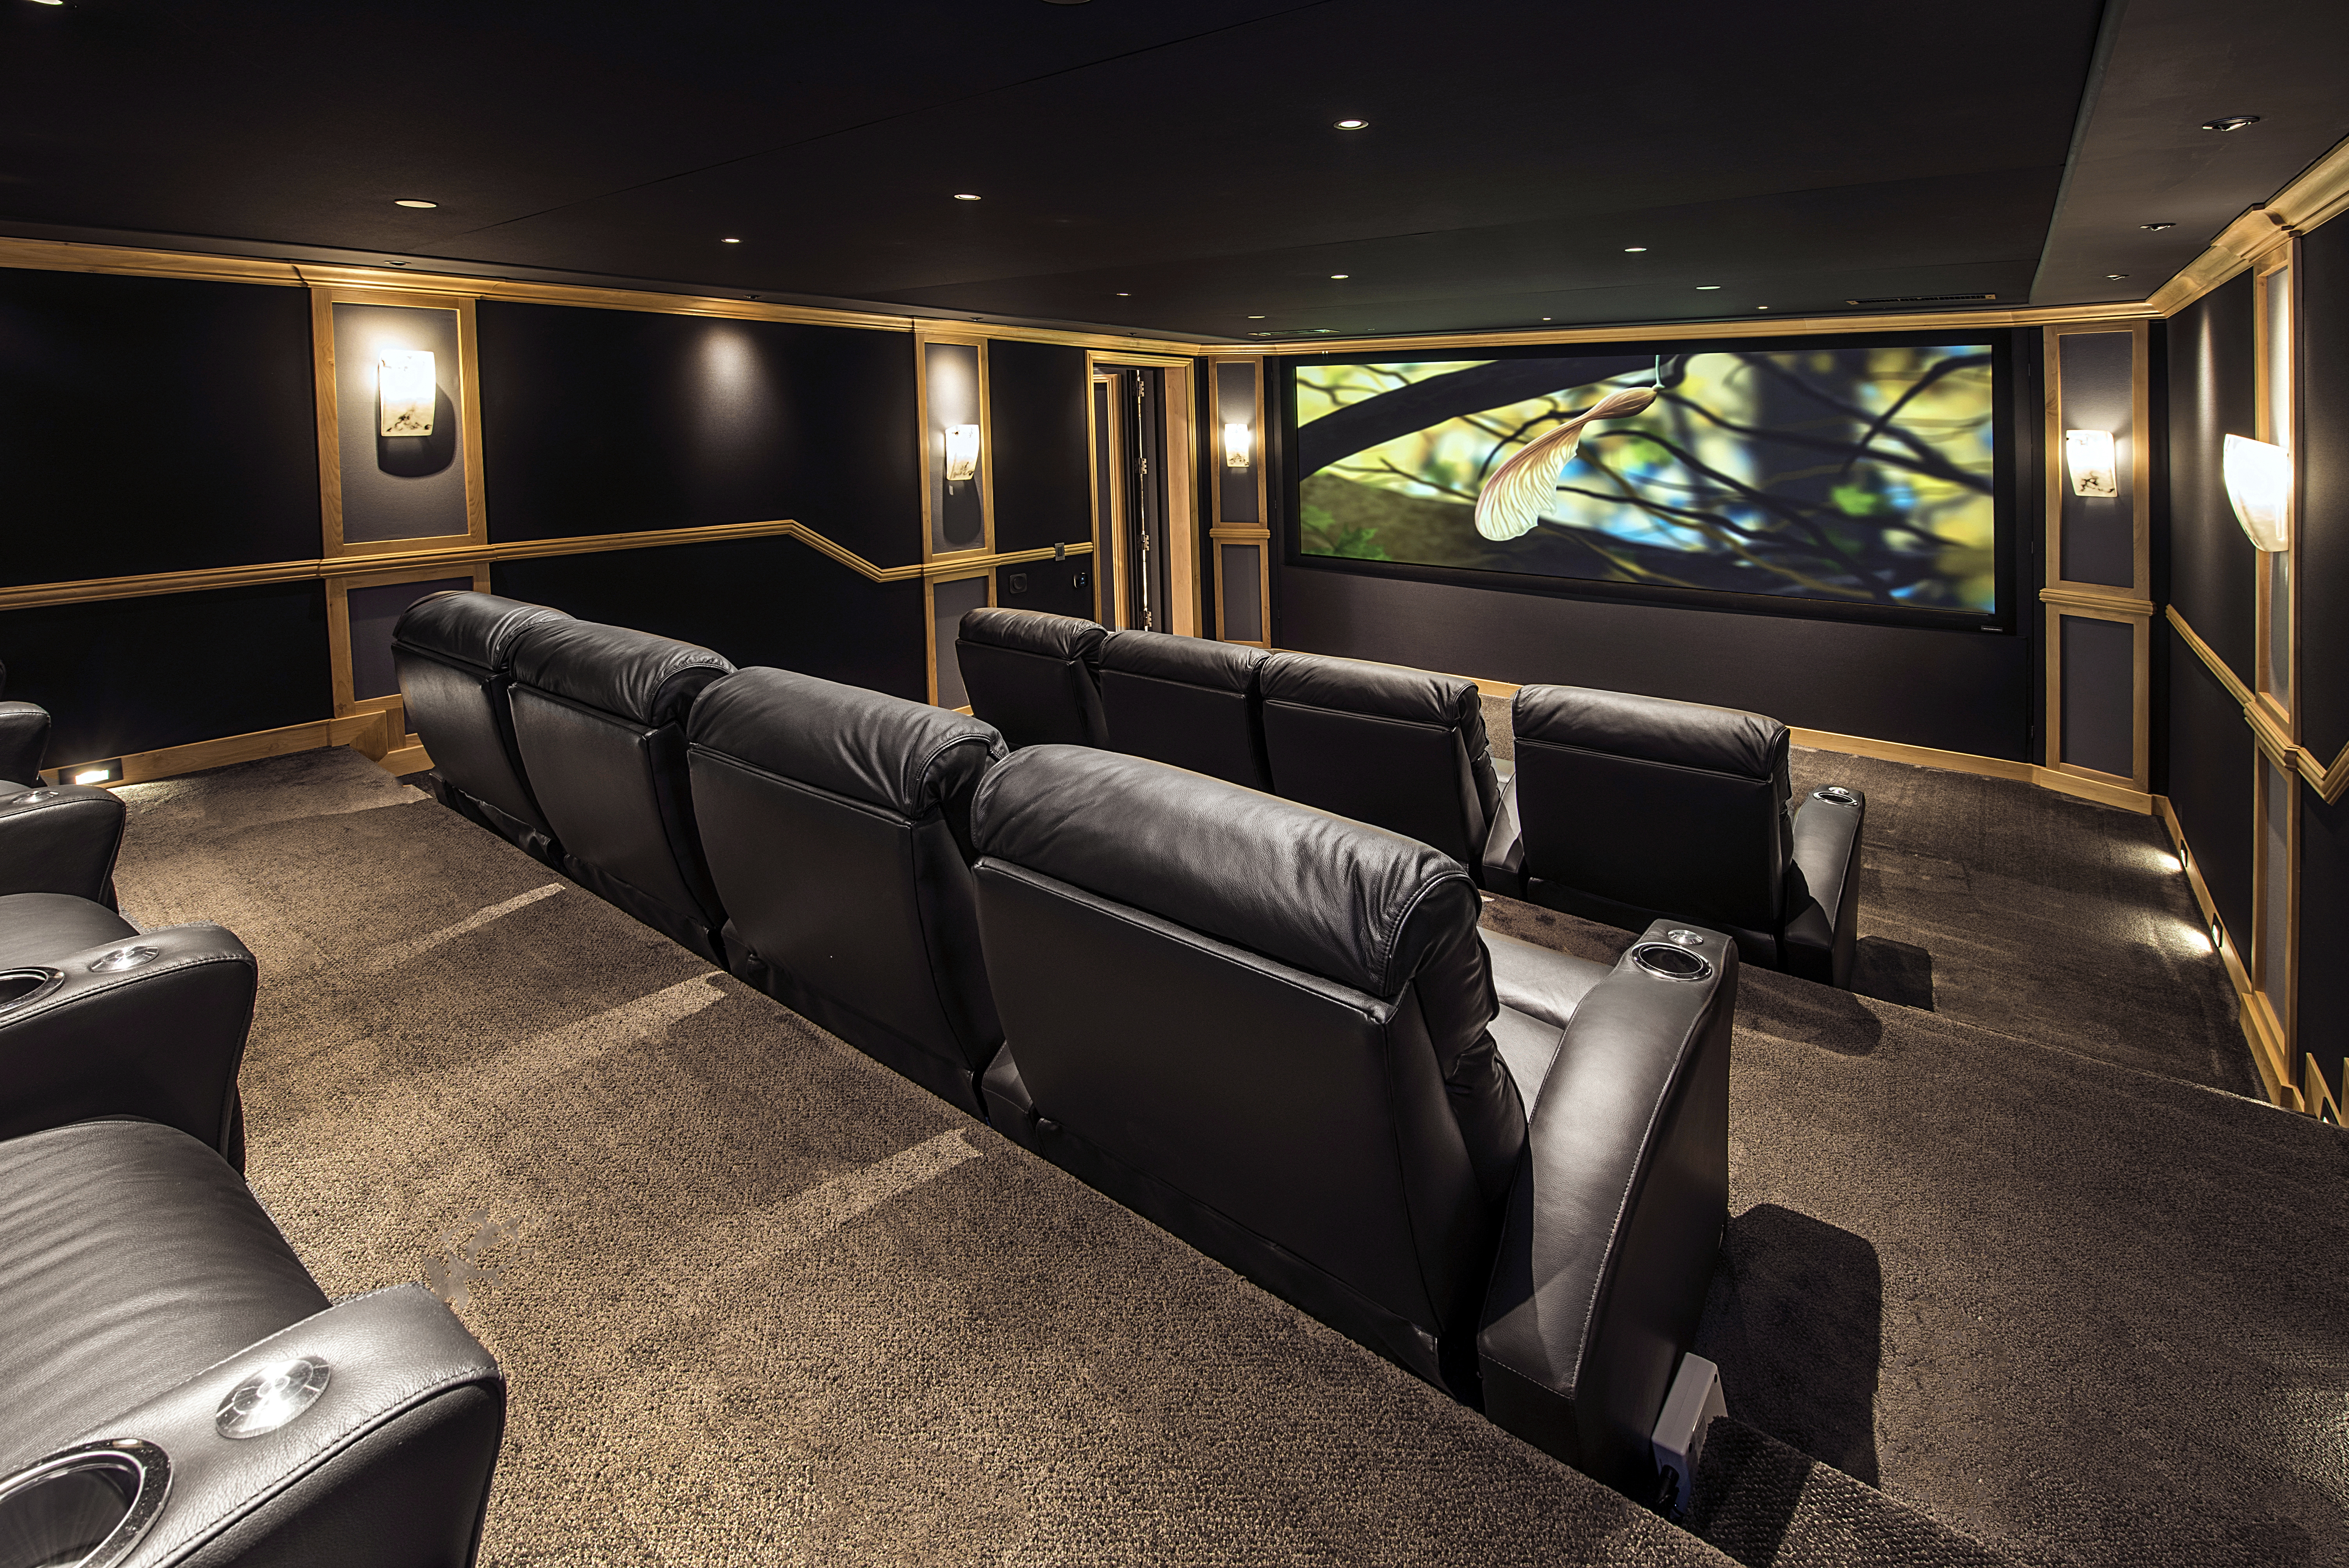 10 Steps to Improve the Sound Experience of Your Home Theater Designs